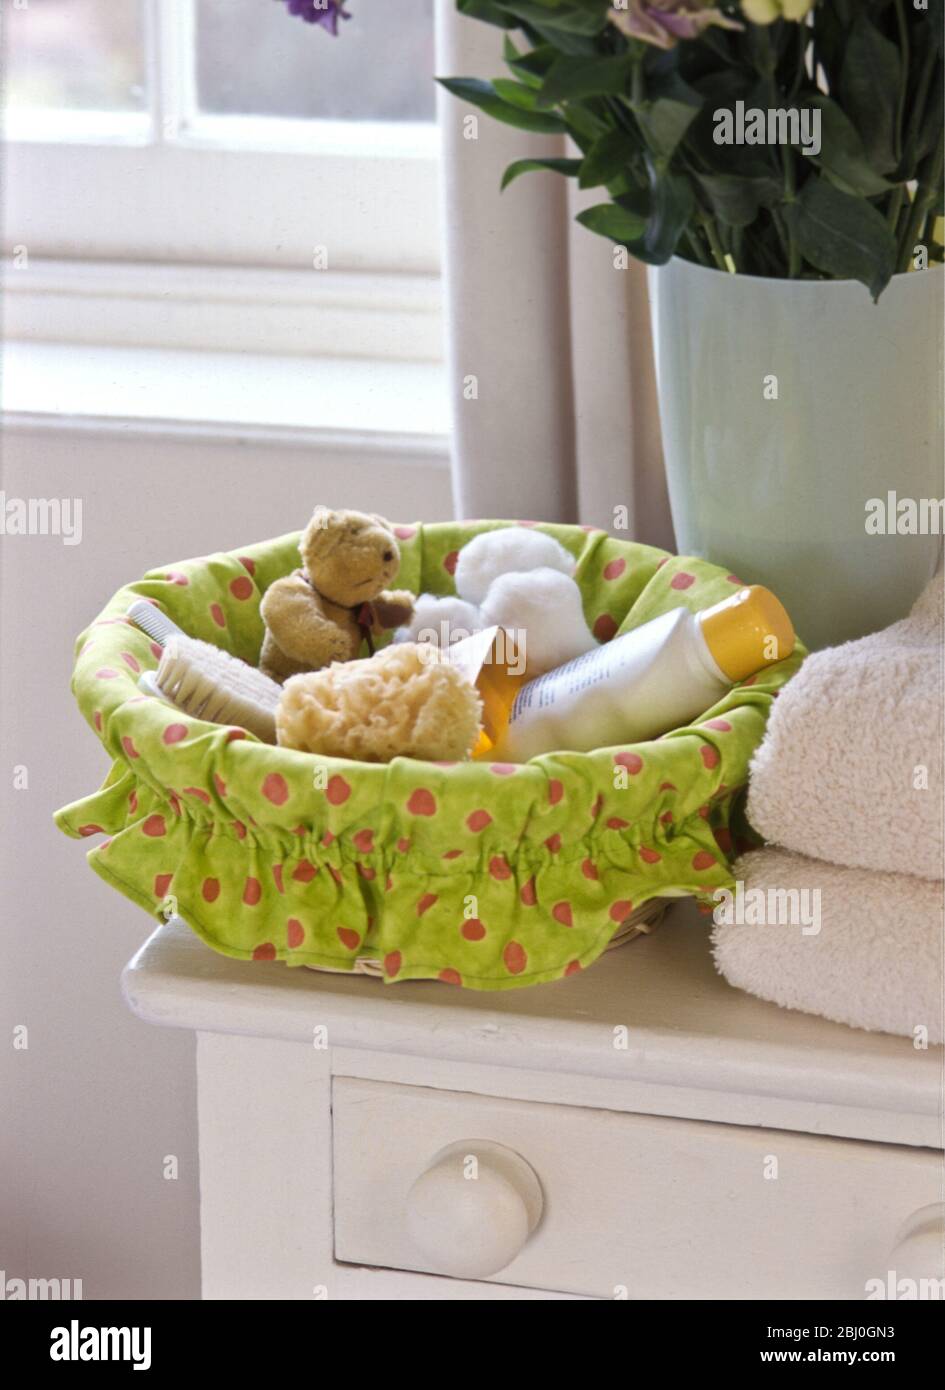 Basket of baby toiletries and little toys, lined with green fabric, in bedroom setting. - Stock Photo